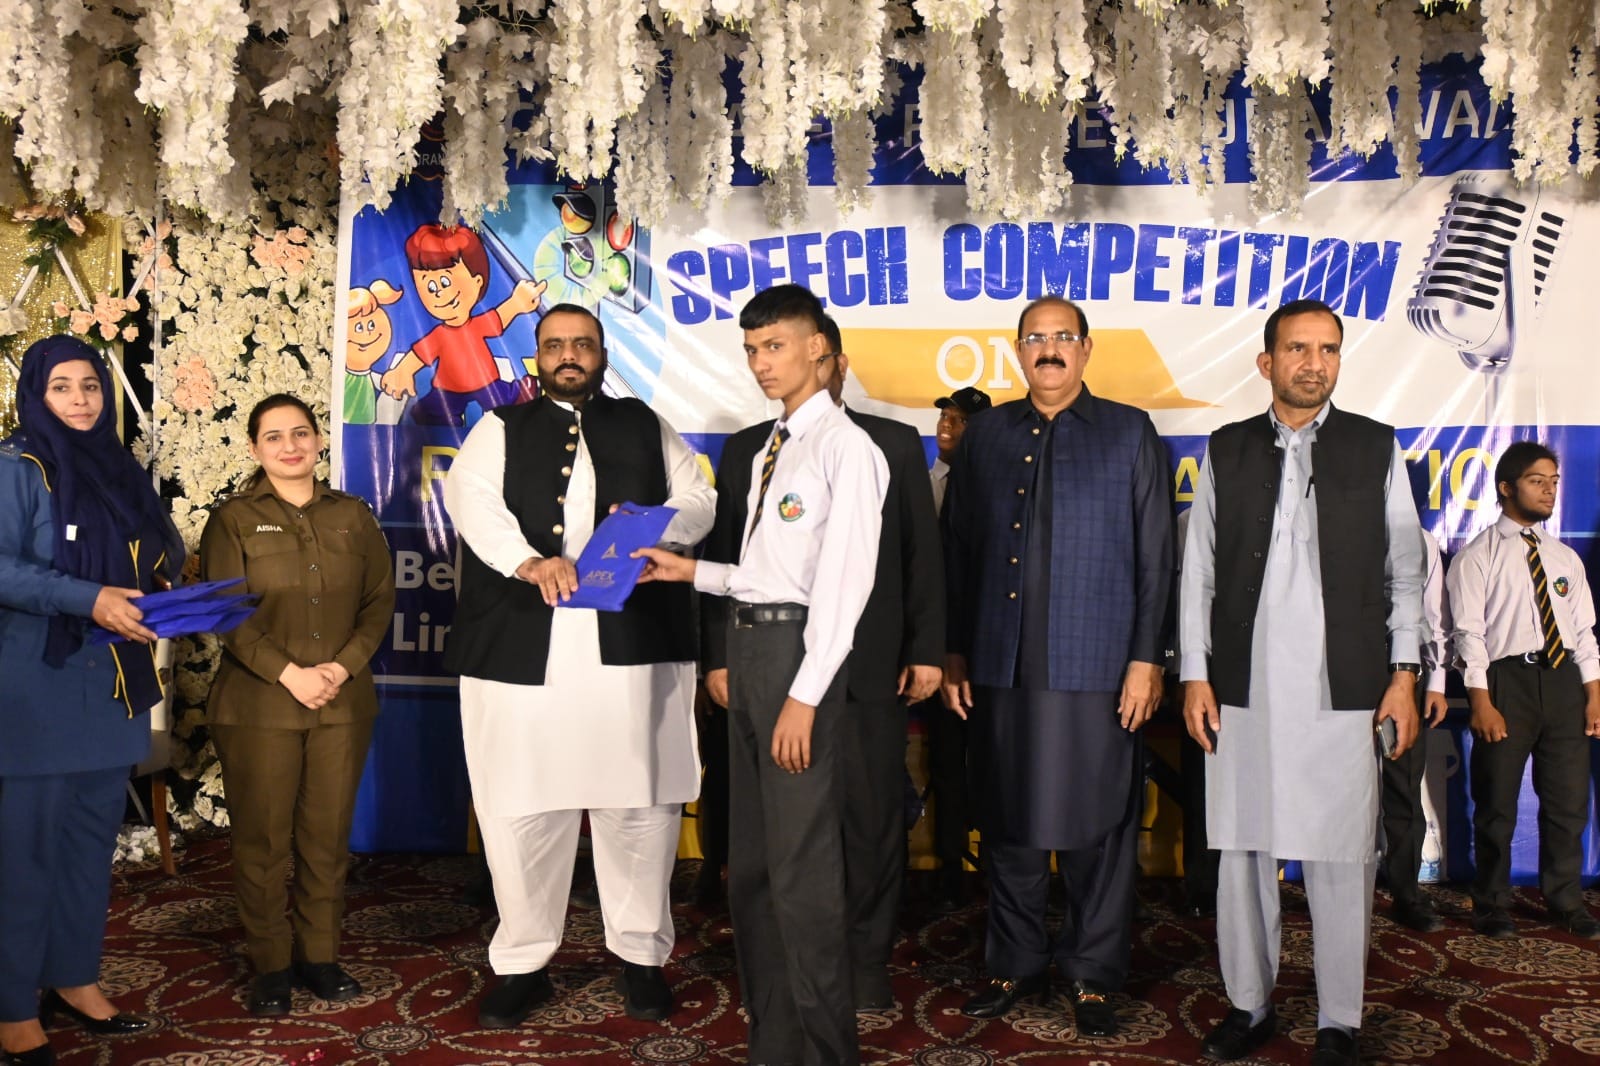 Road Safety and Narcotics Speech Competition.